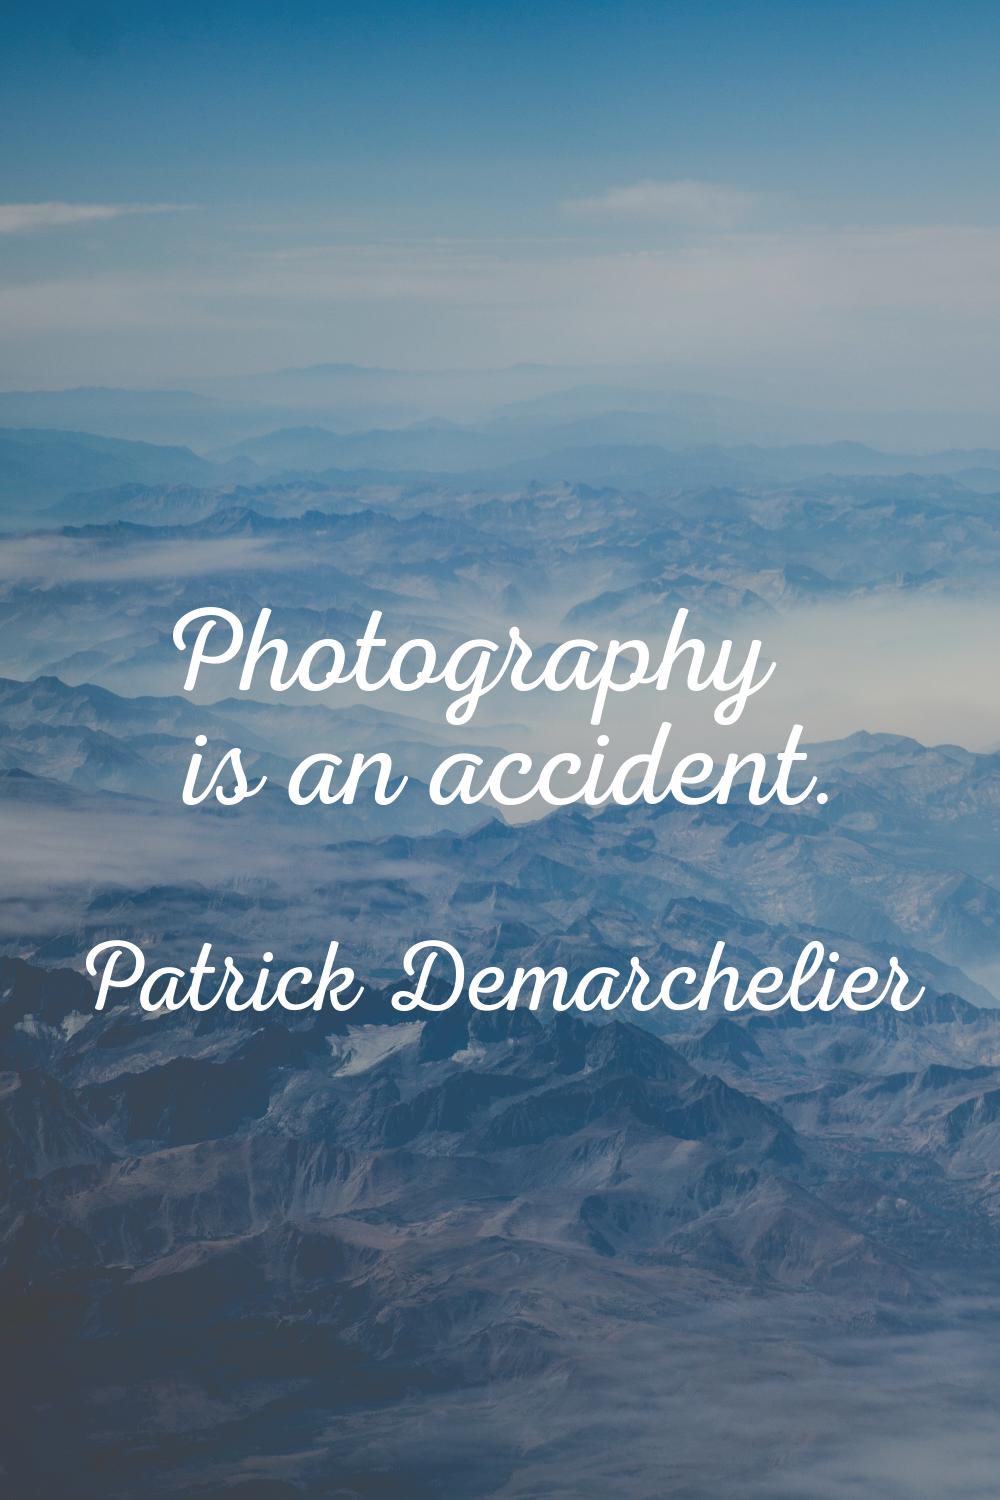 Photography is an accident.